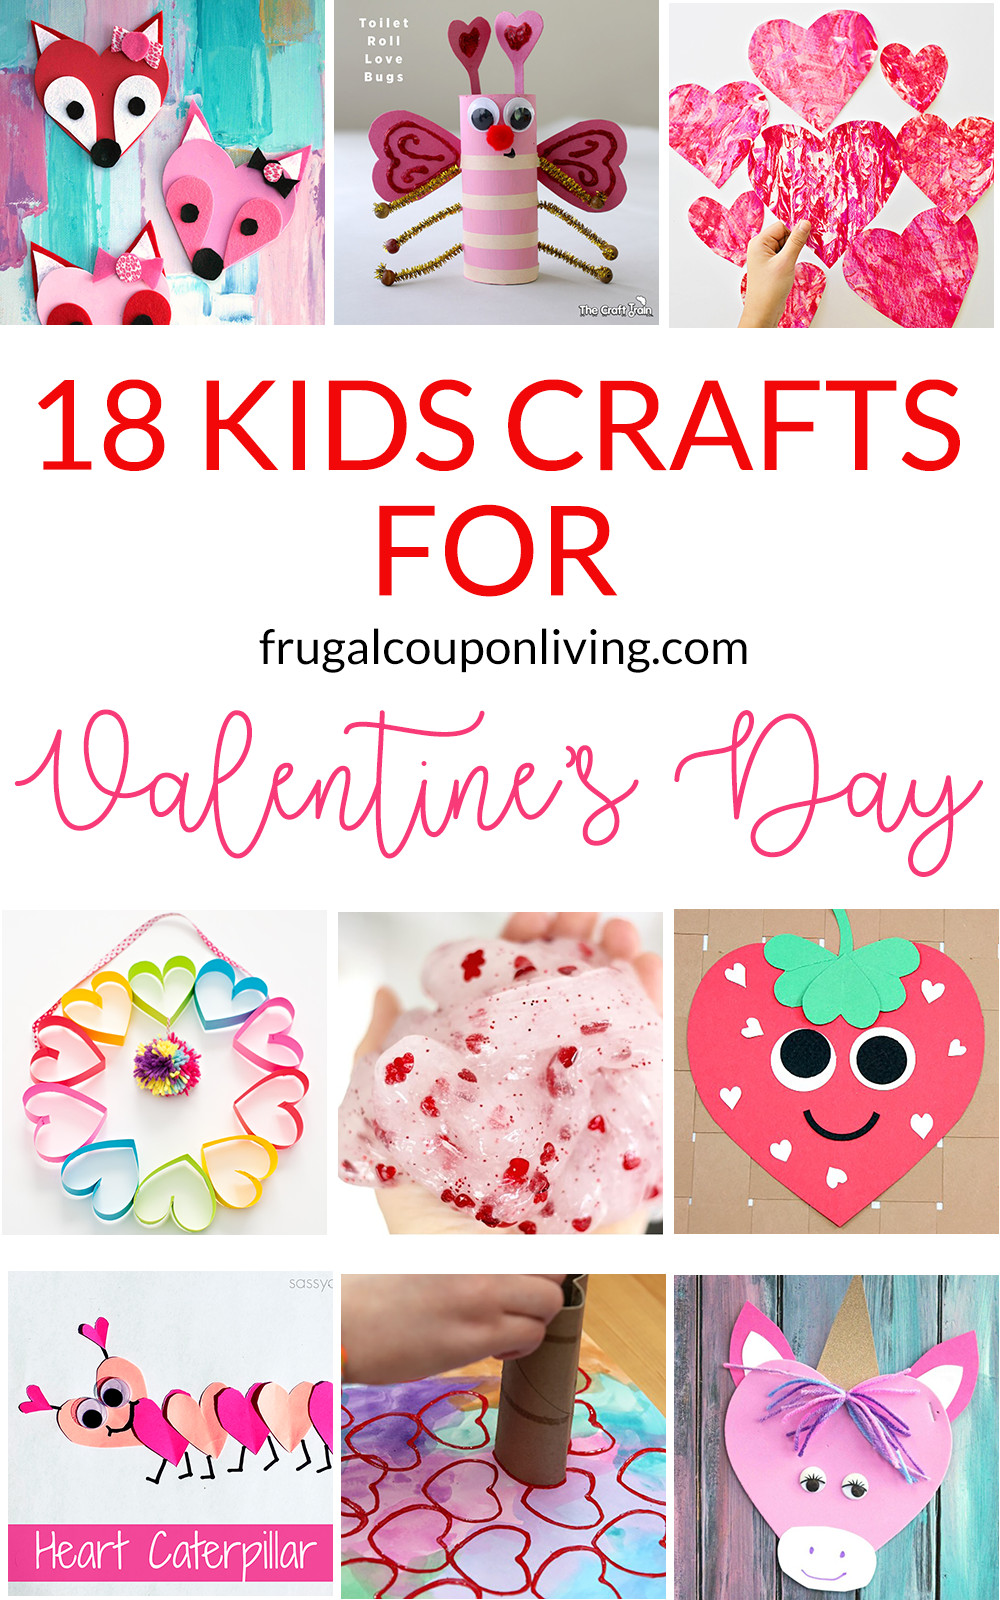 Cute Easy Crafts For Kids
 Pin on Crafty fun